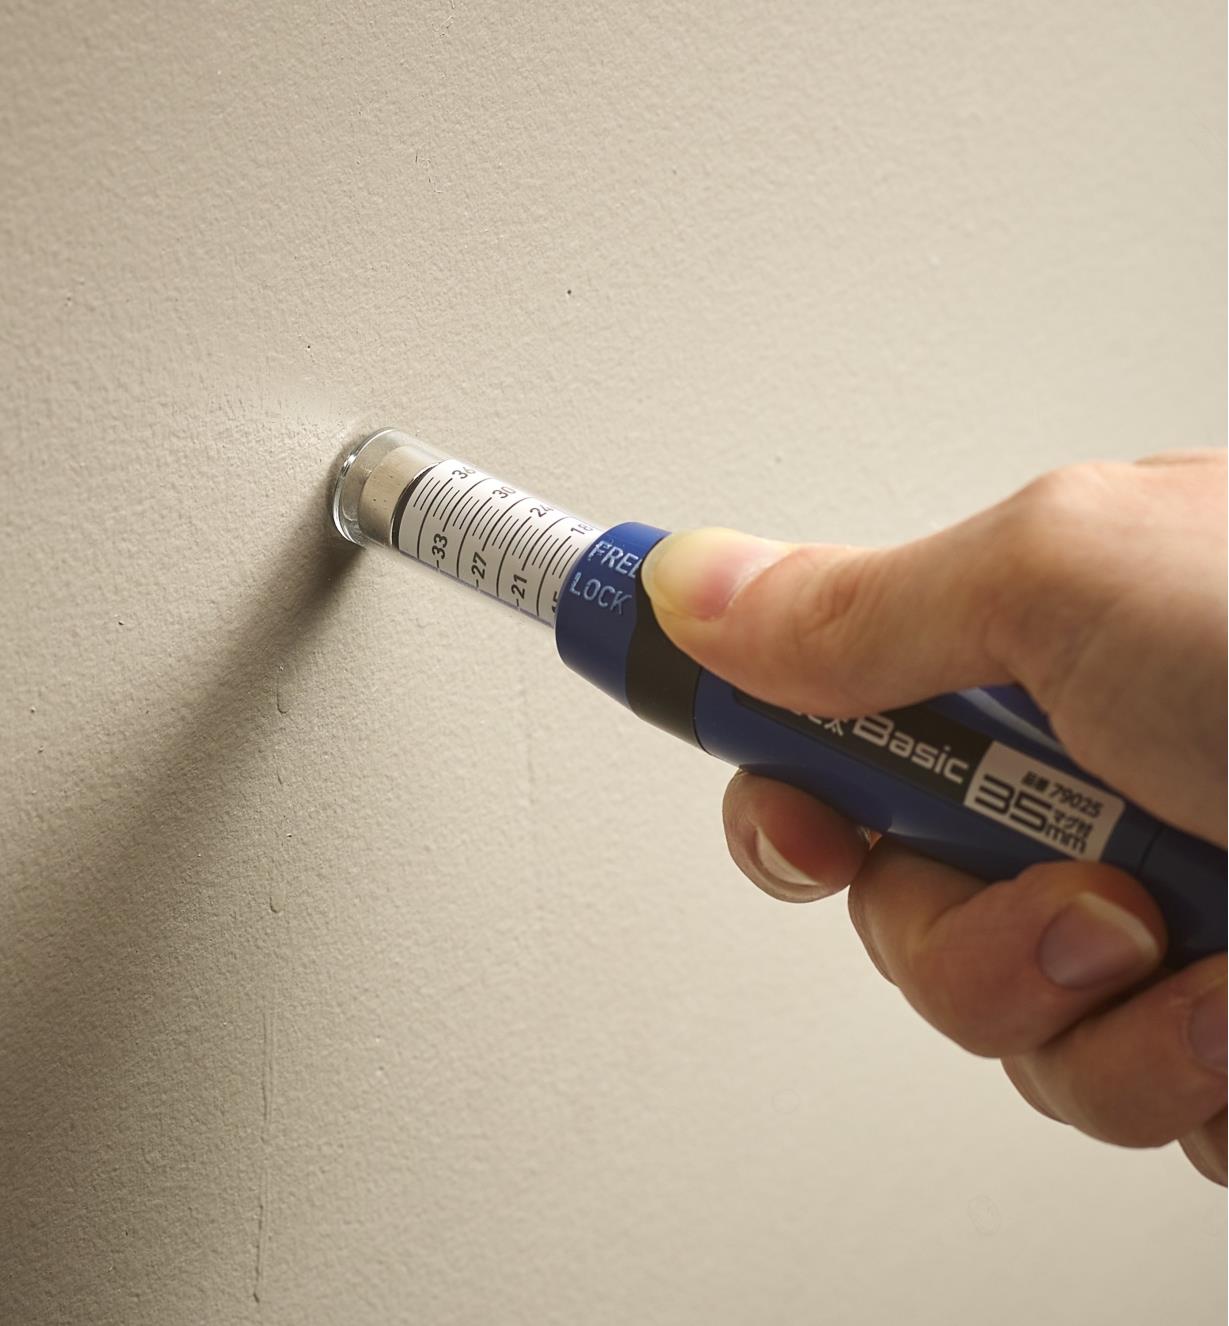 A stud finder pressed against a wall